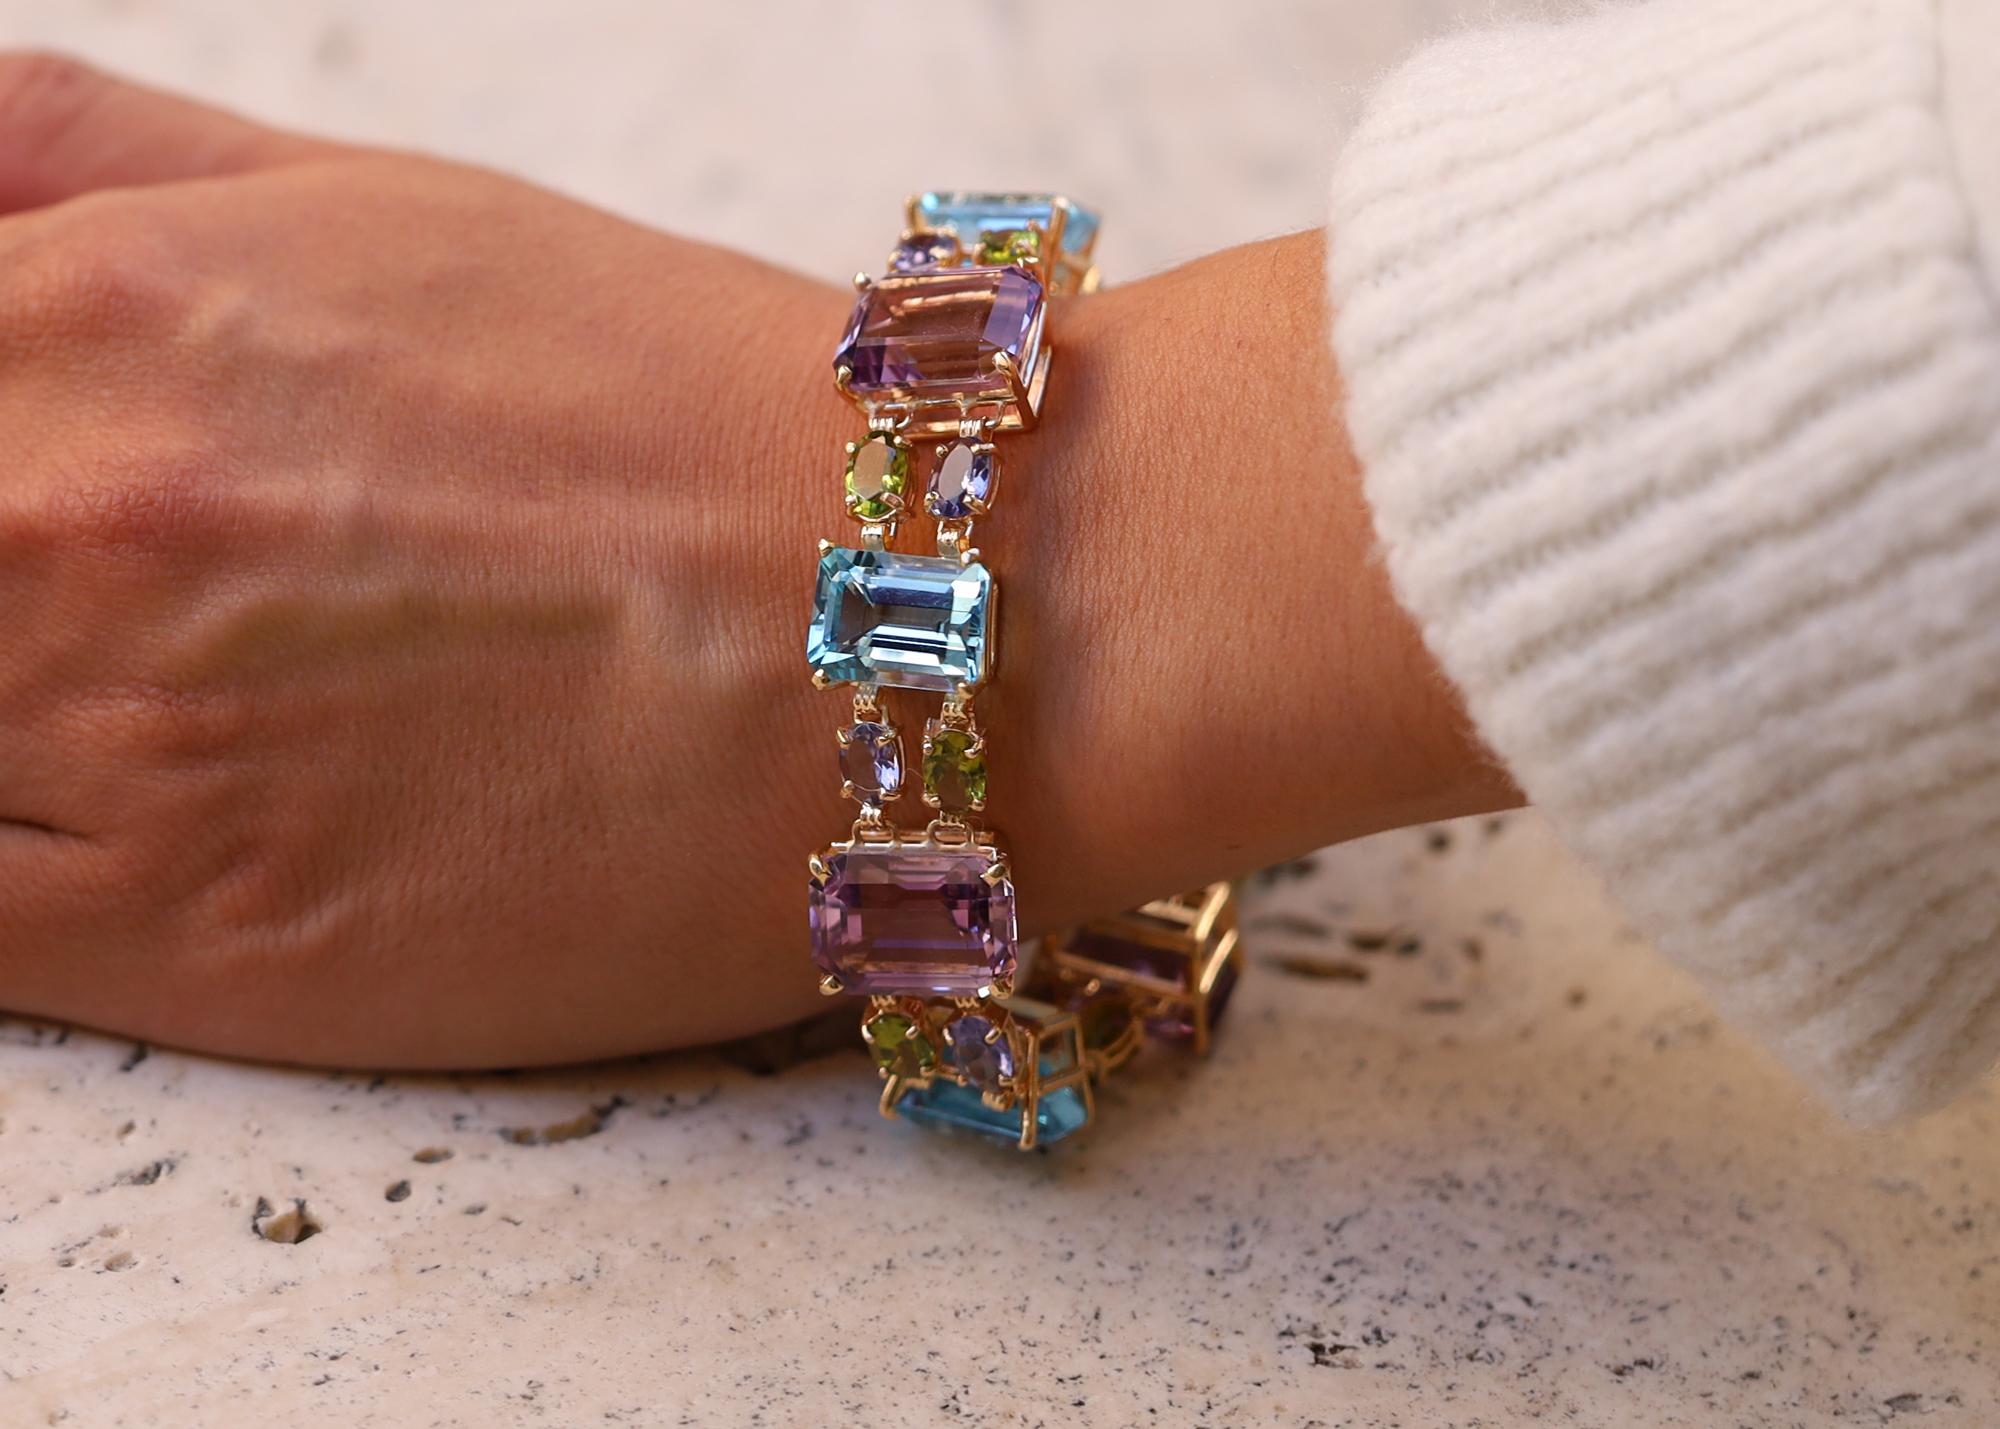 An authentic vintage 1980's rainbow gemstone unisex bracelet. 14 karat yellow gold links embrace nearly 100 carats of royal purple amethysts, vivid blue topaz alternating with peridot and iolite links. Presenting Indian hallmarks with expert